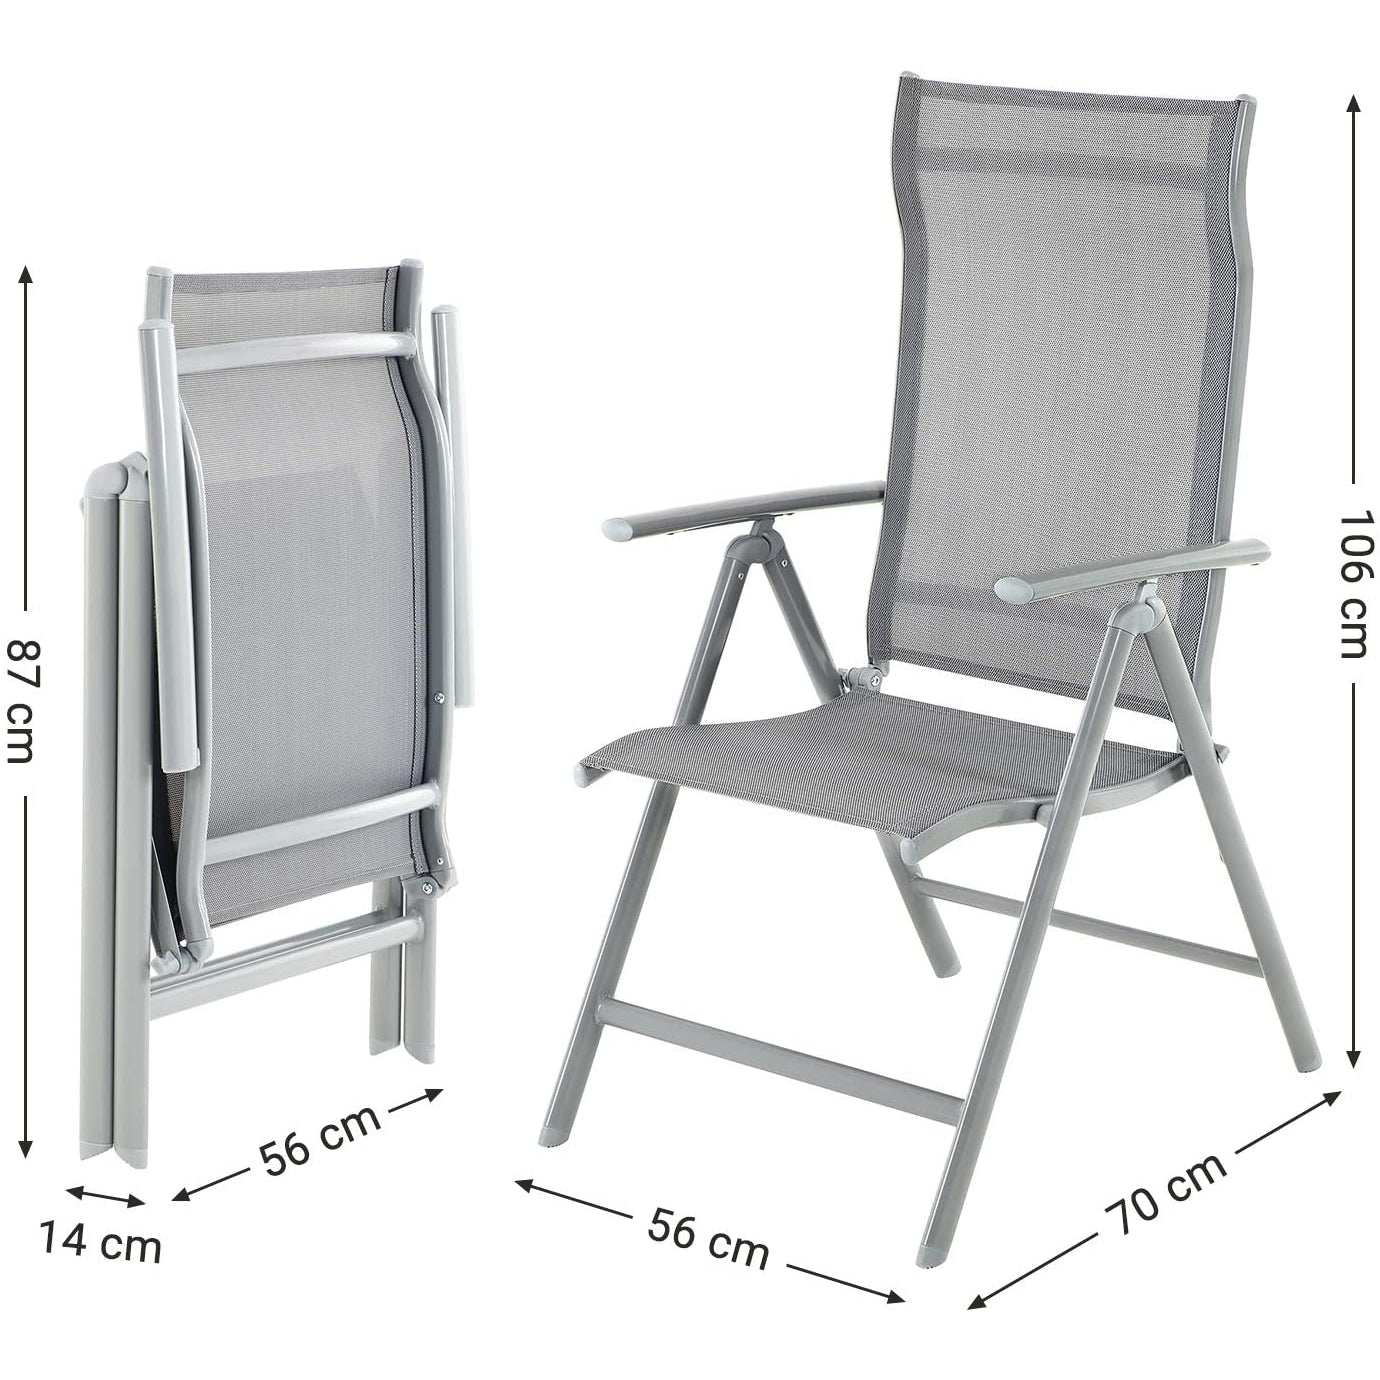 Nancy's Betonville Garden Chairs - Set of 4 - Folding Chairs - Outdoor Chairs - Aluminum Frame - Adjustable Backrest - Gray